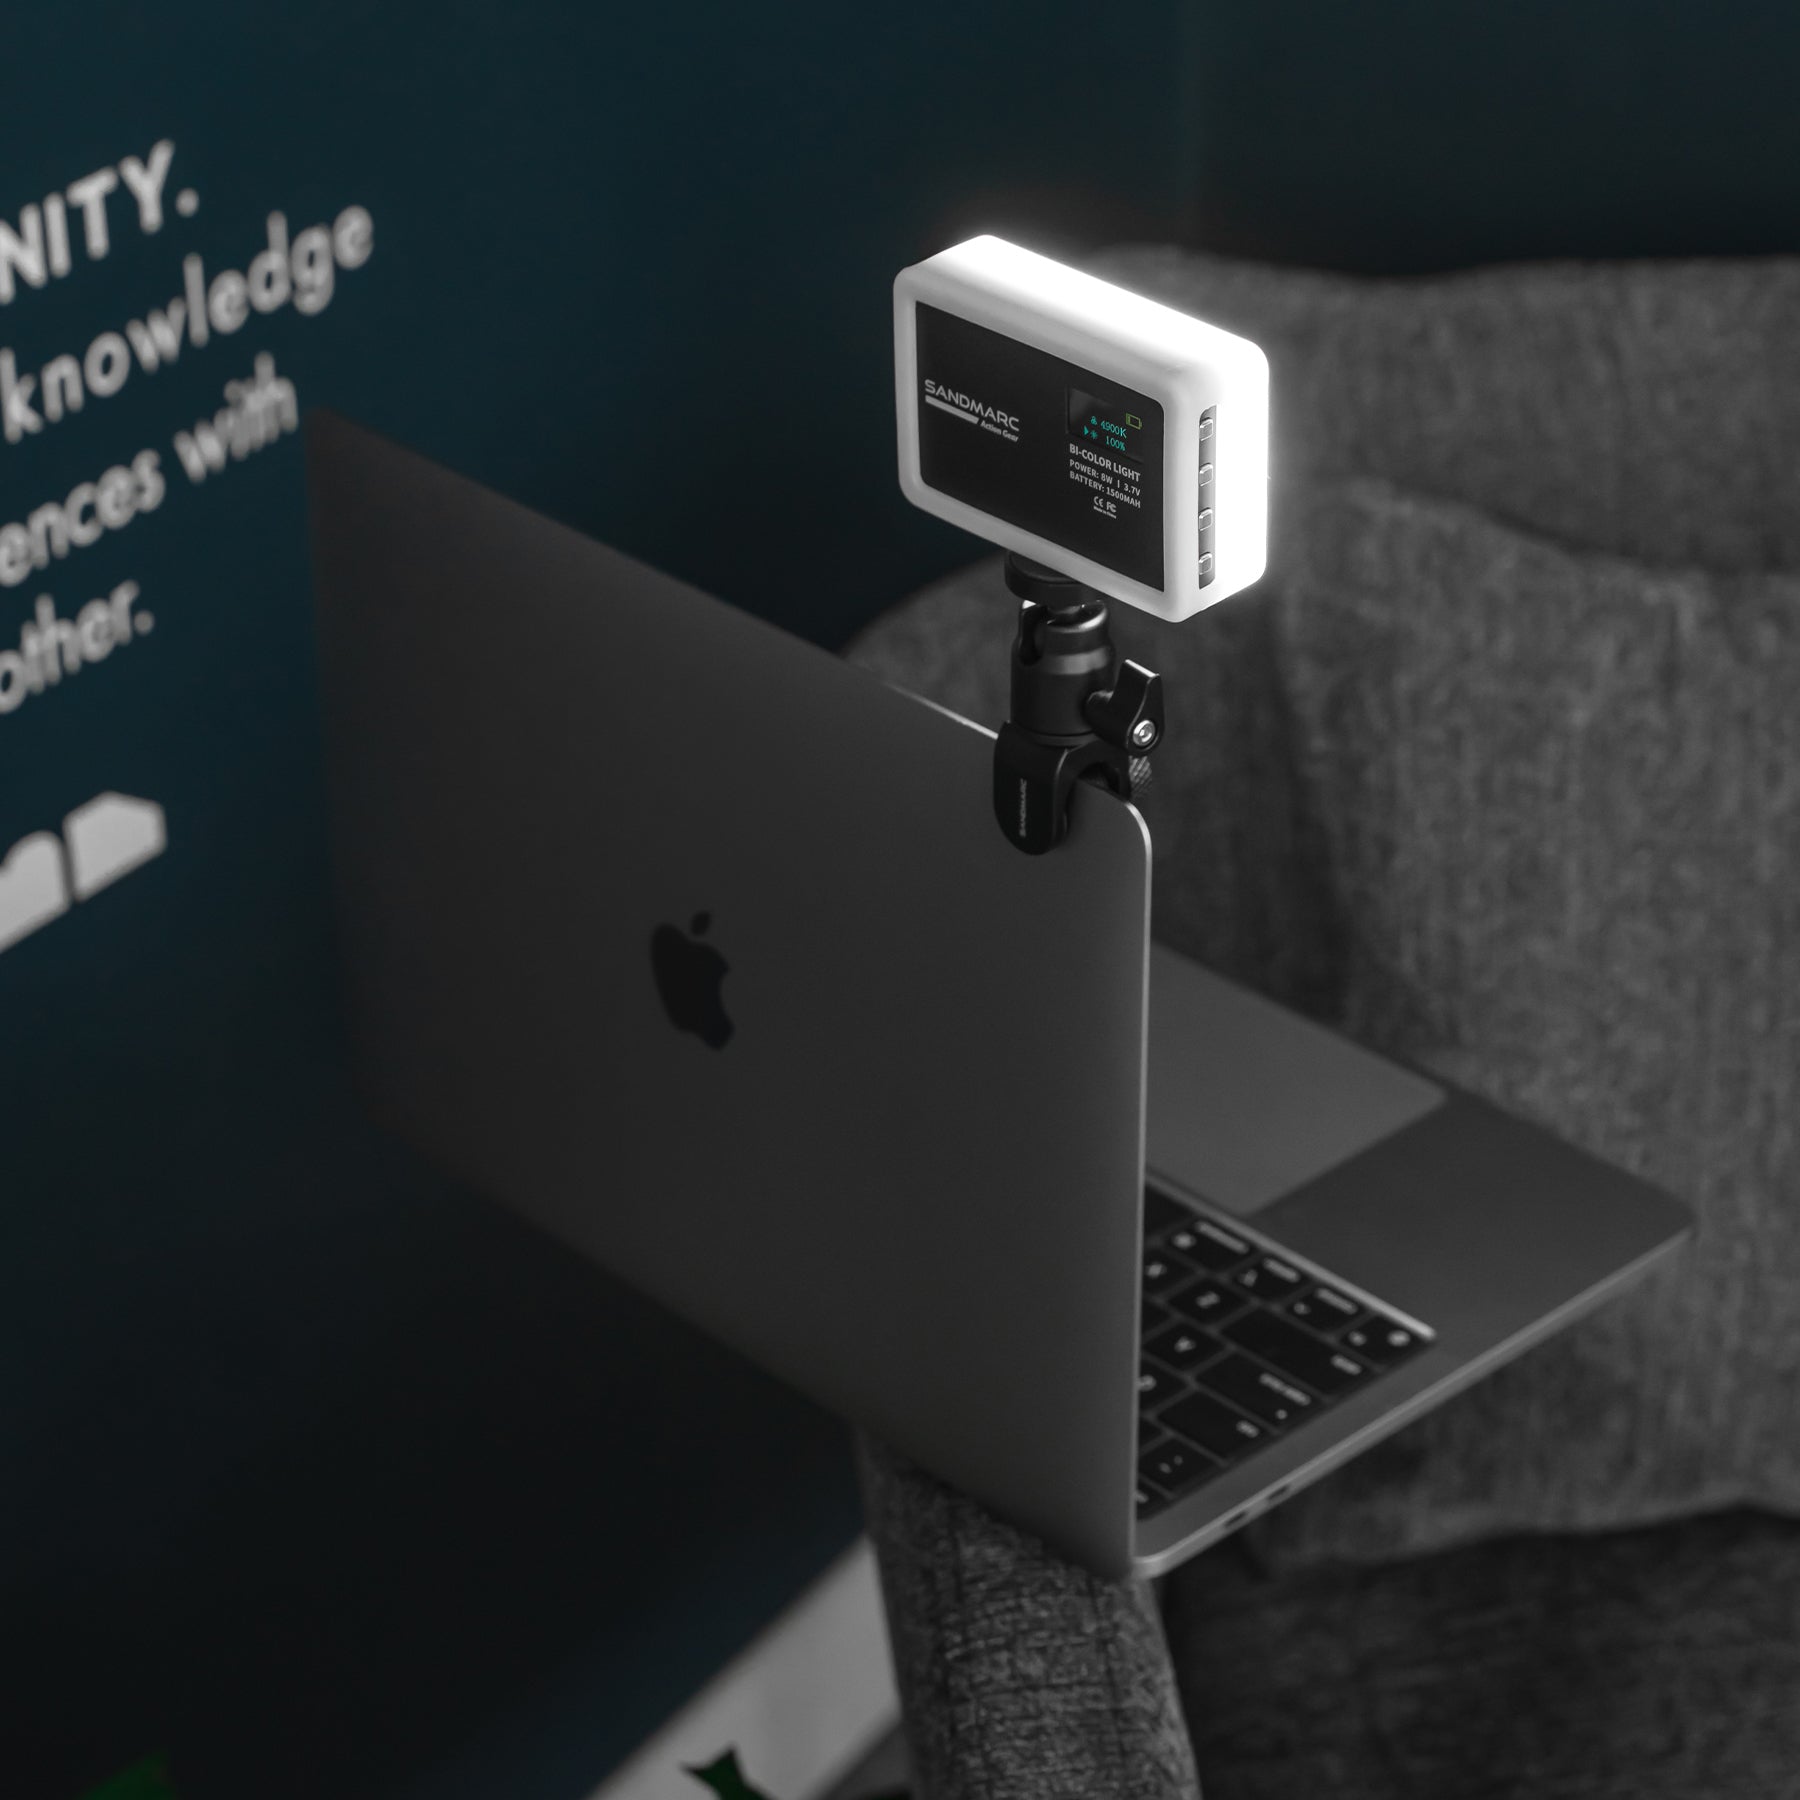 Video Conference Lighting Kit for Zoom, Teams, Skype and Facetime Calls - MacBook, iPhone, iPad - Before After - SANDMARC Prolight 